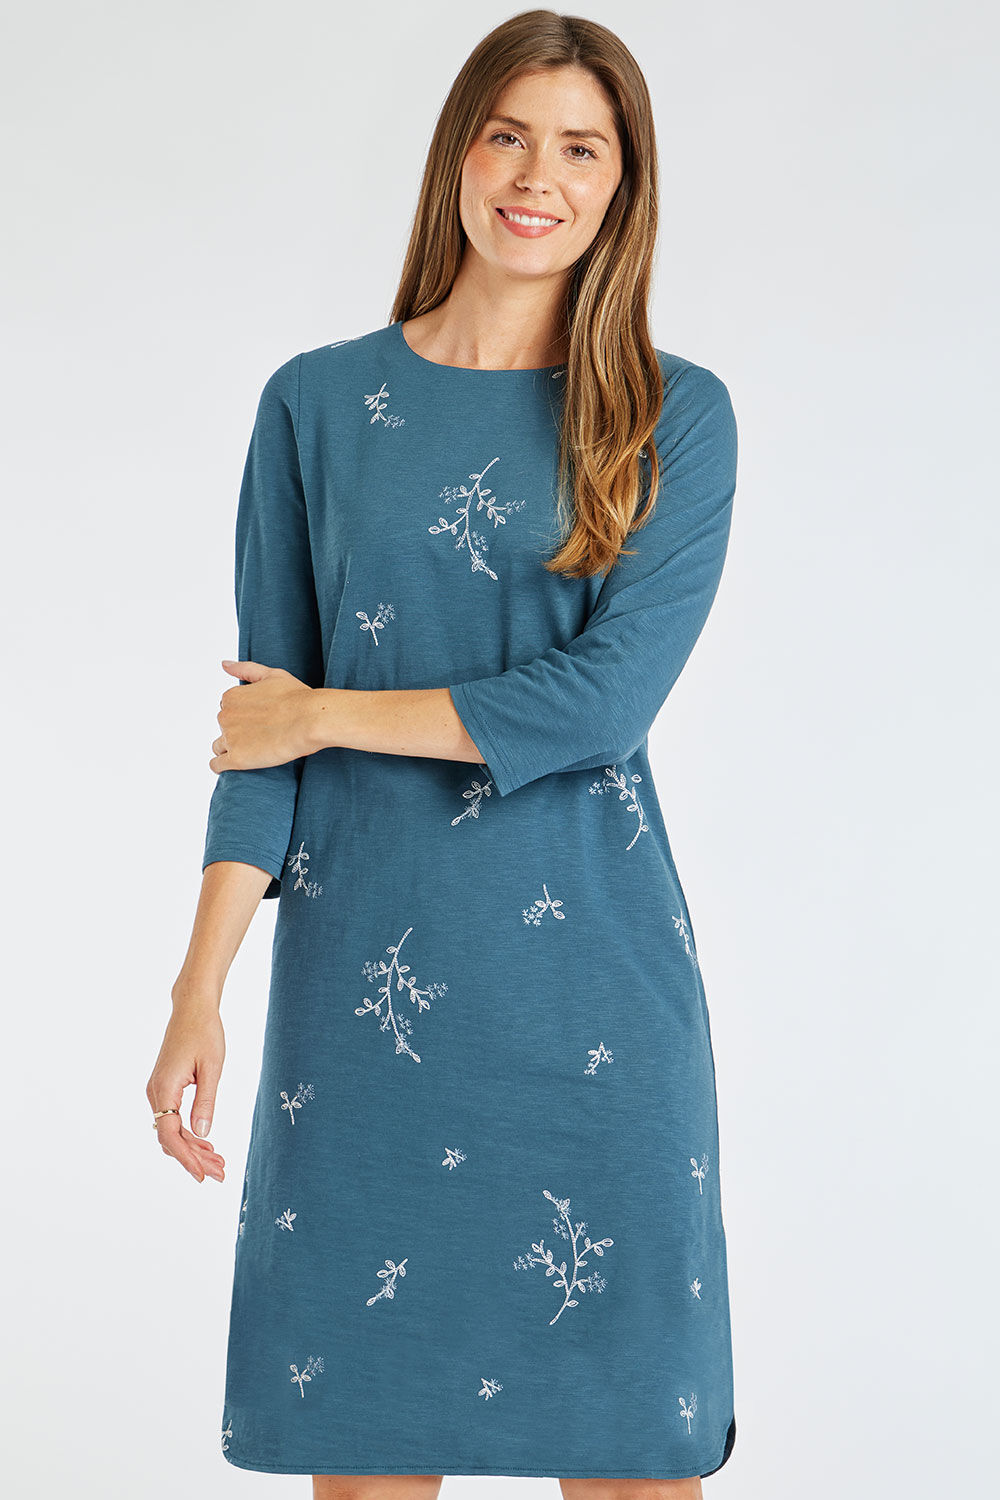 Bonmarche Teal Embroidered Cotton Tunic Dress, Size: 10